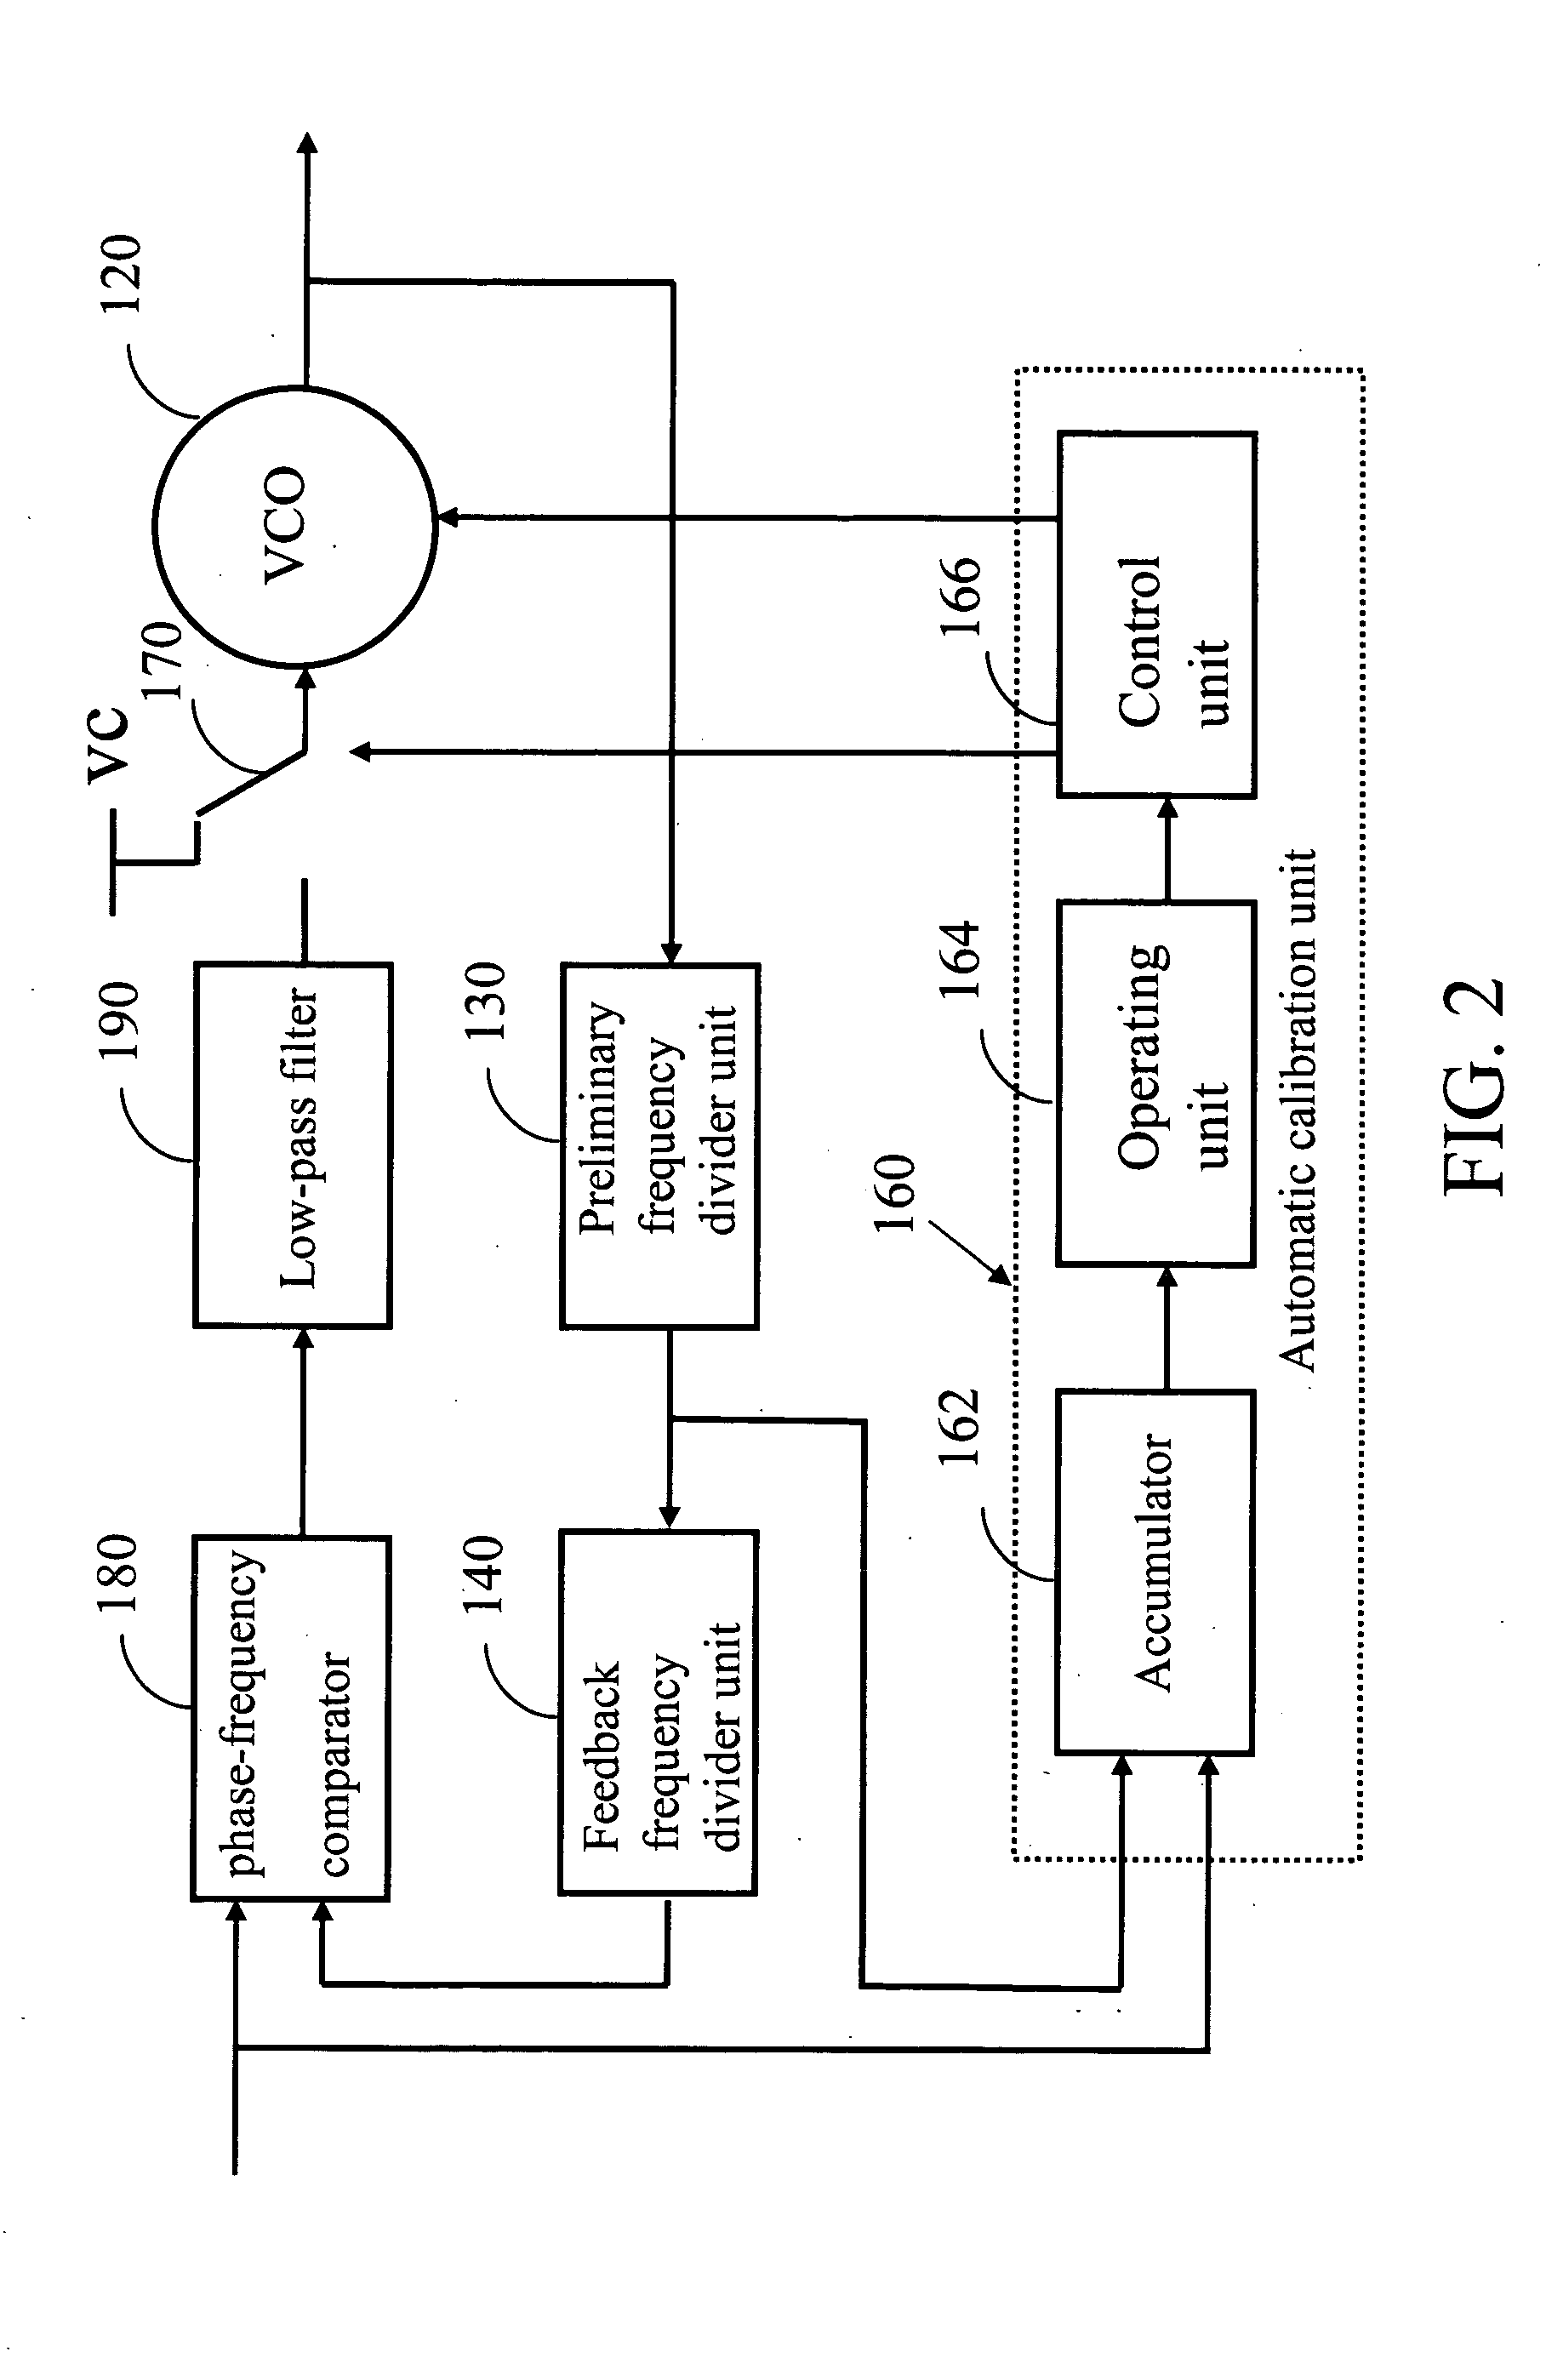 Frequency synthesizing device with automatic calibration